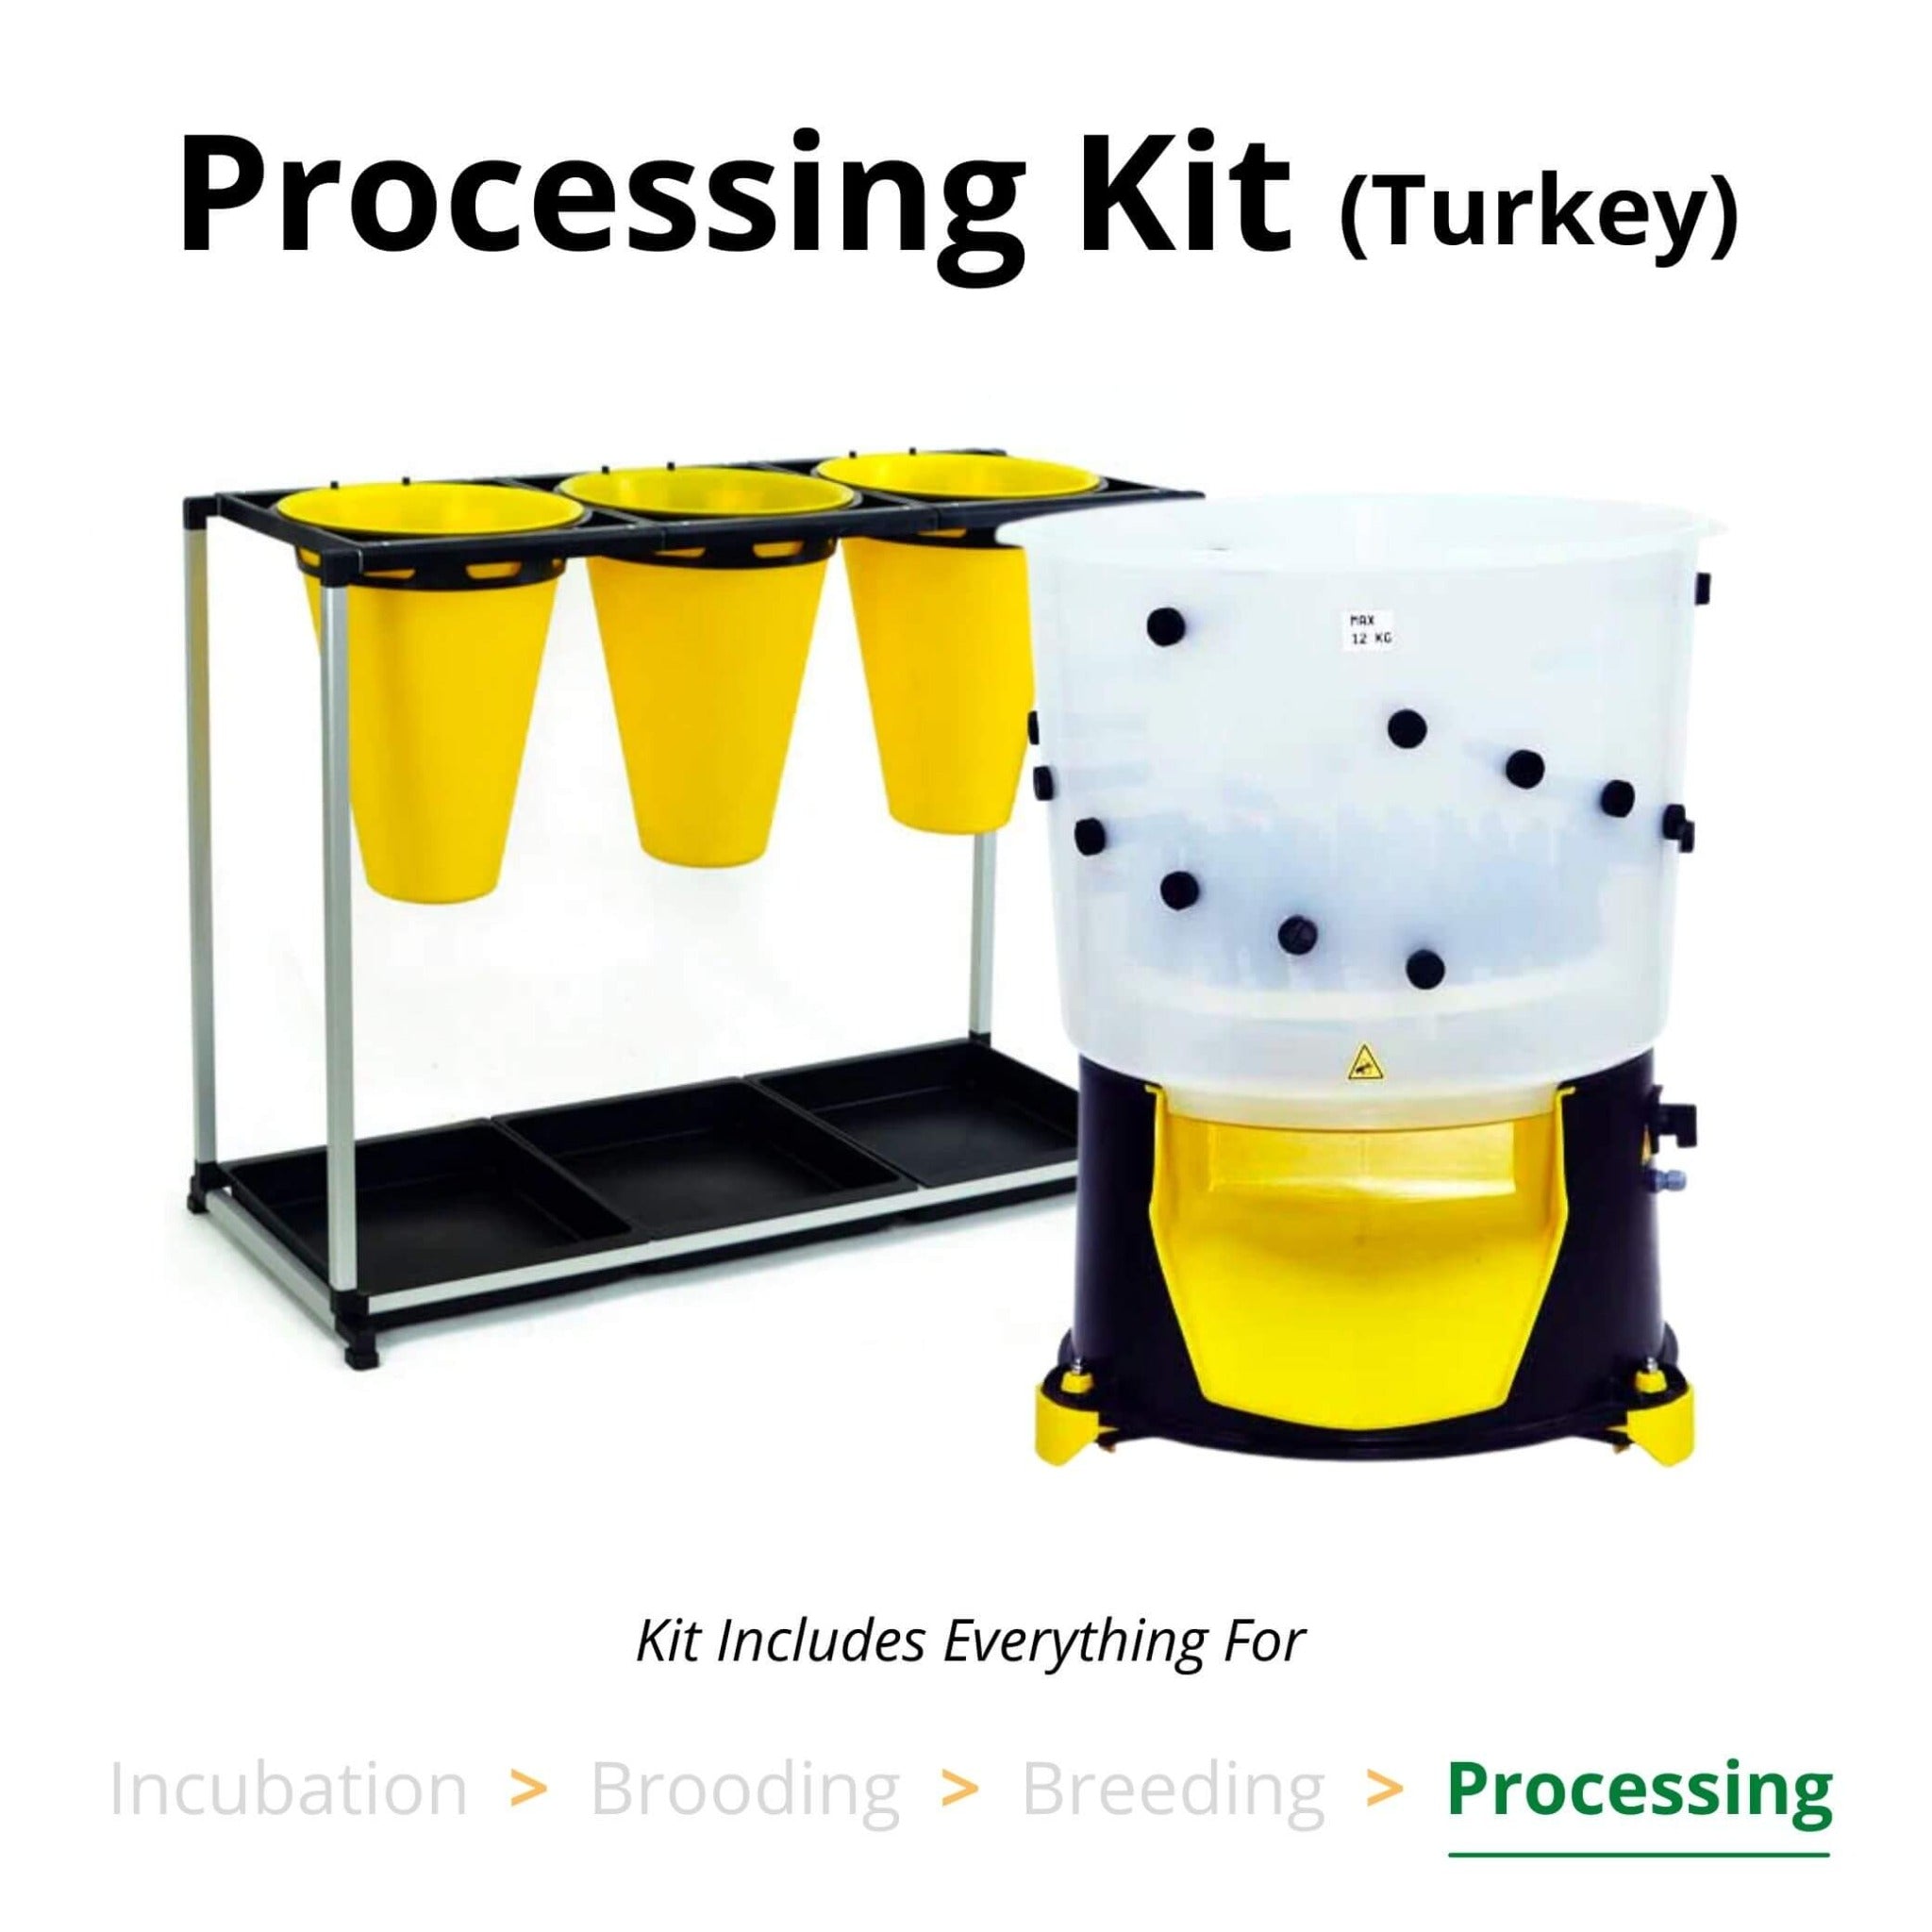 Hatching Time Cimuka. Image shows a processing kit for Turkey. 3 kill cones can be seen next to a feather plucker. Image text reads “Kit includes everything for Processing”